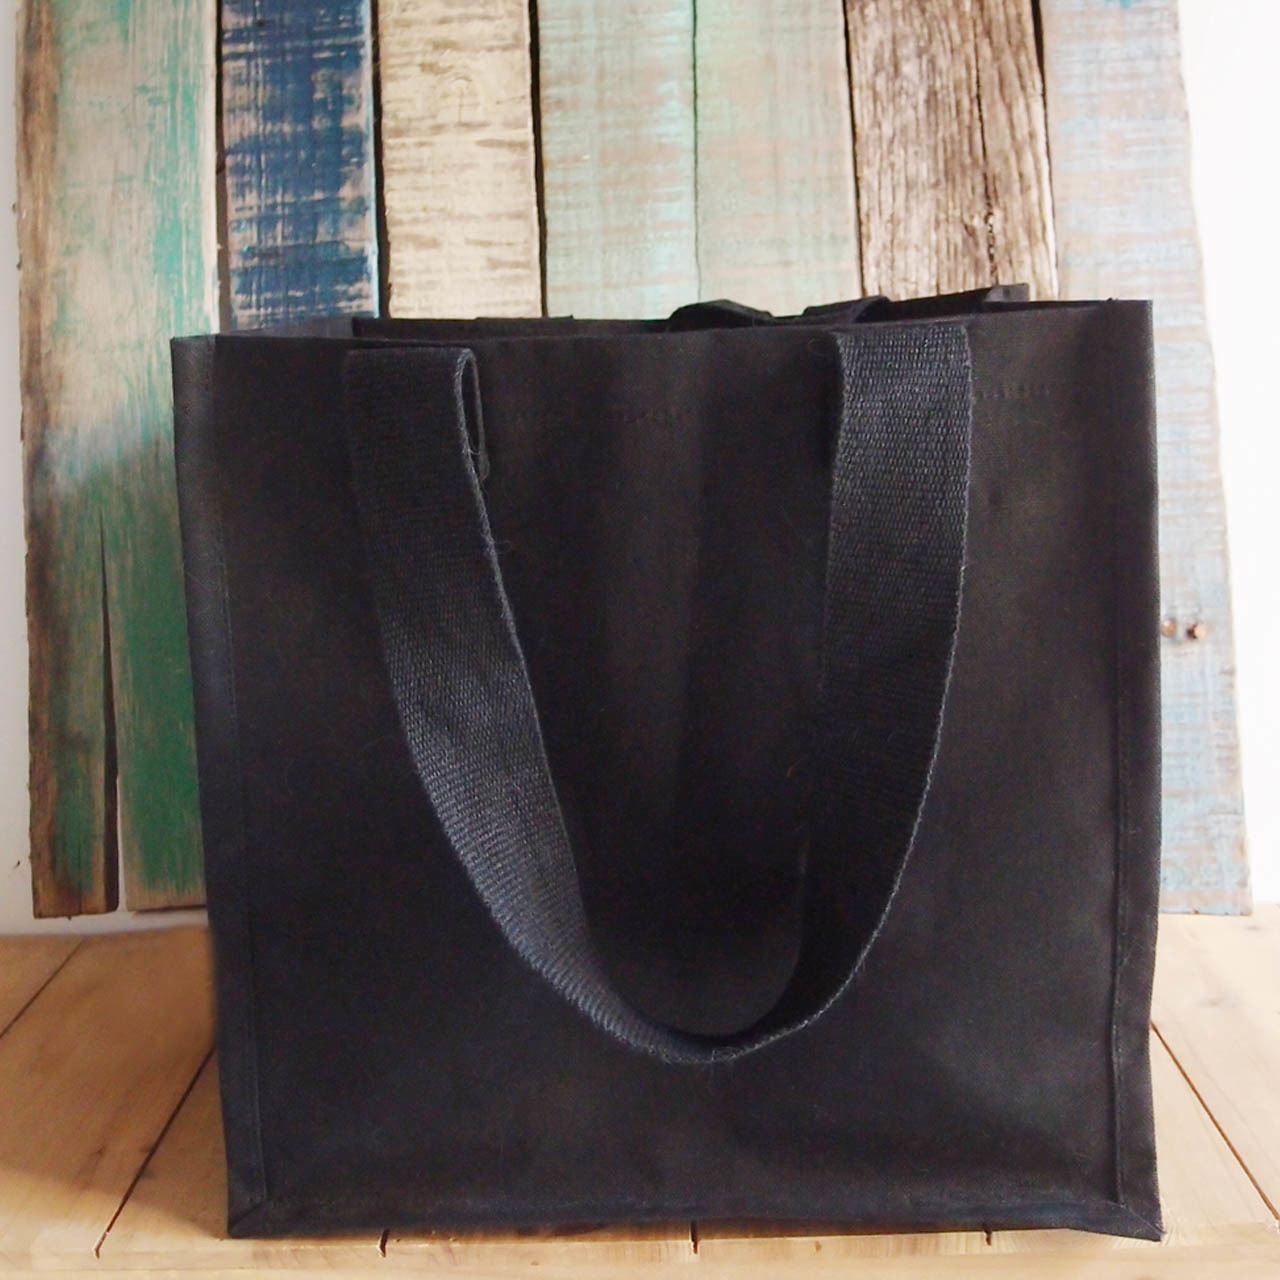 Black Canvas Bag at Best Wholesale Price - Newway Bags China